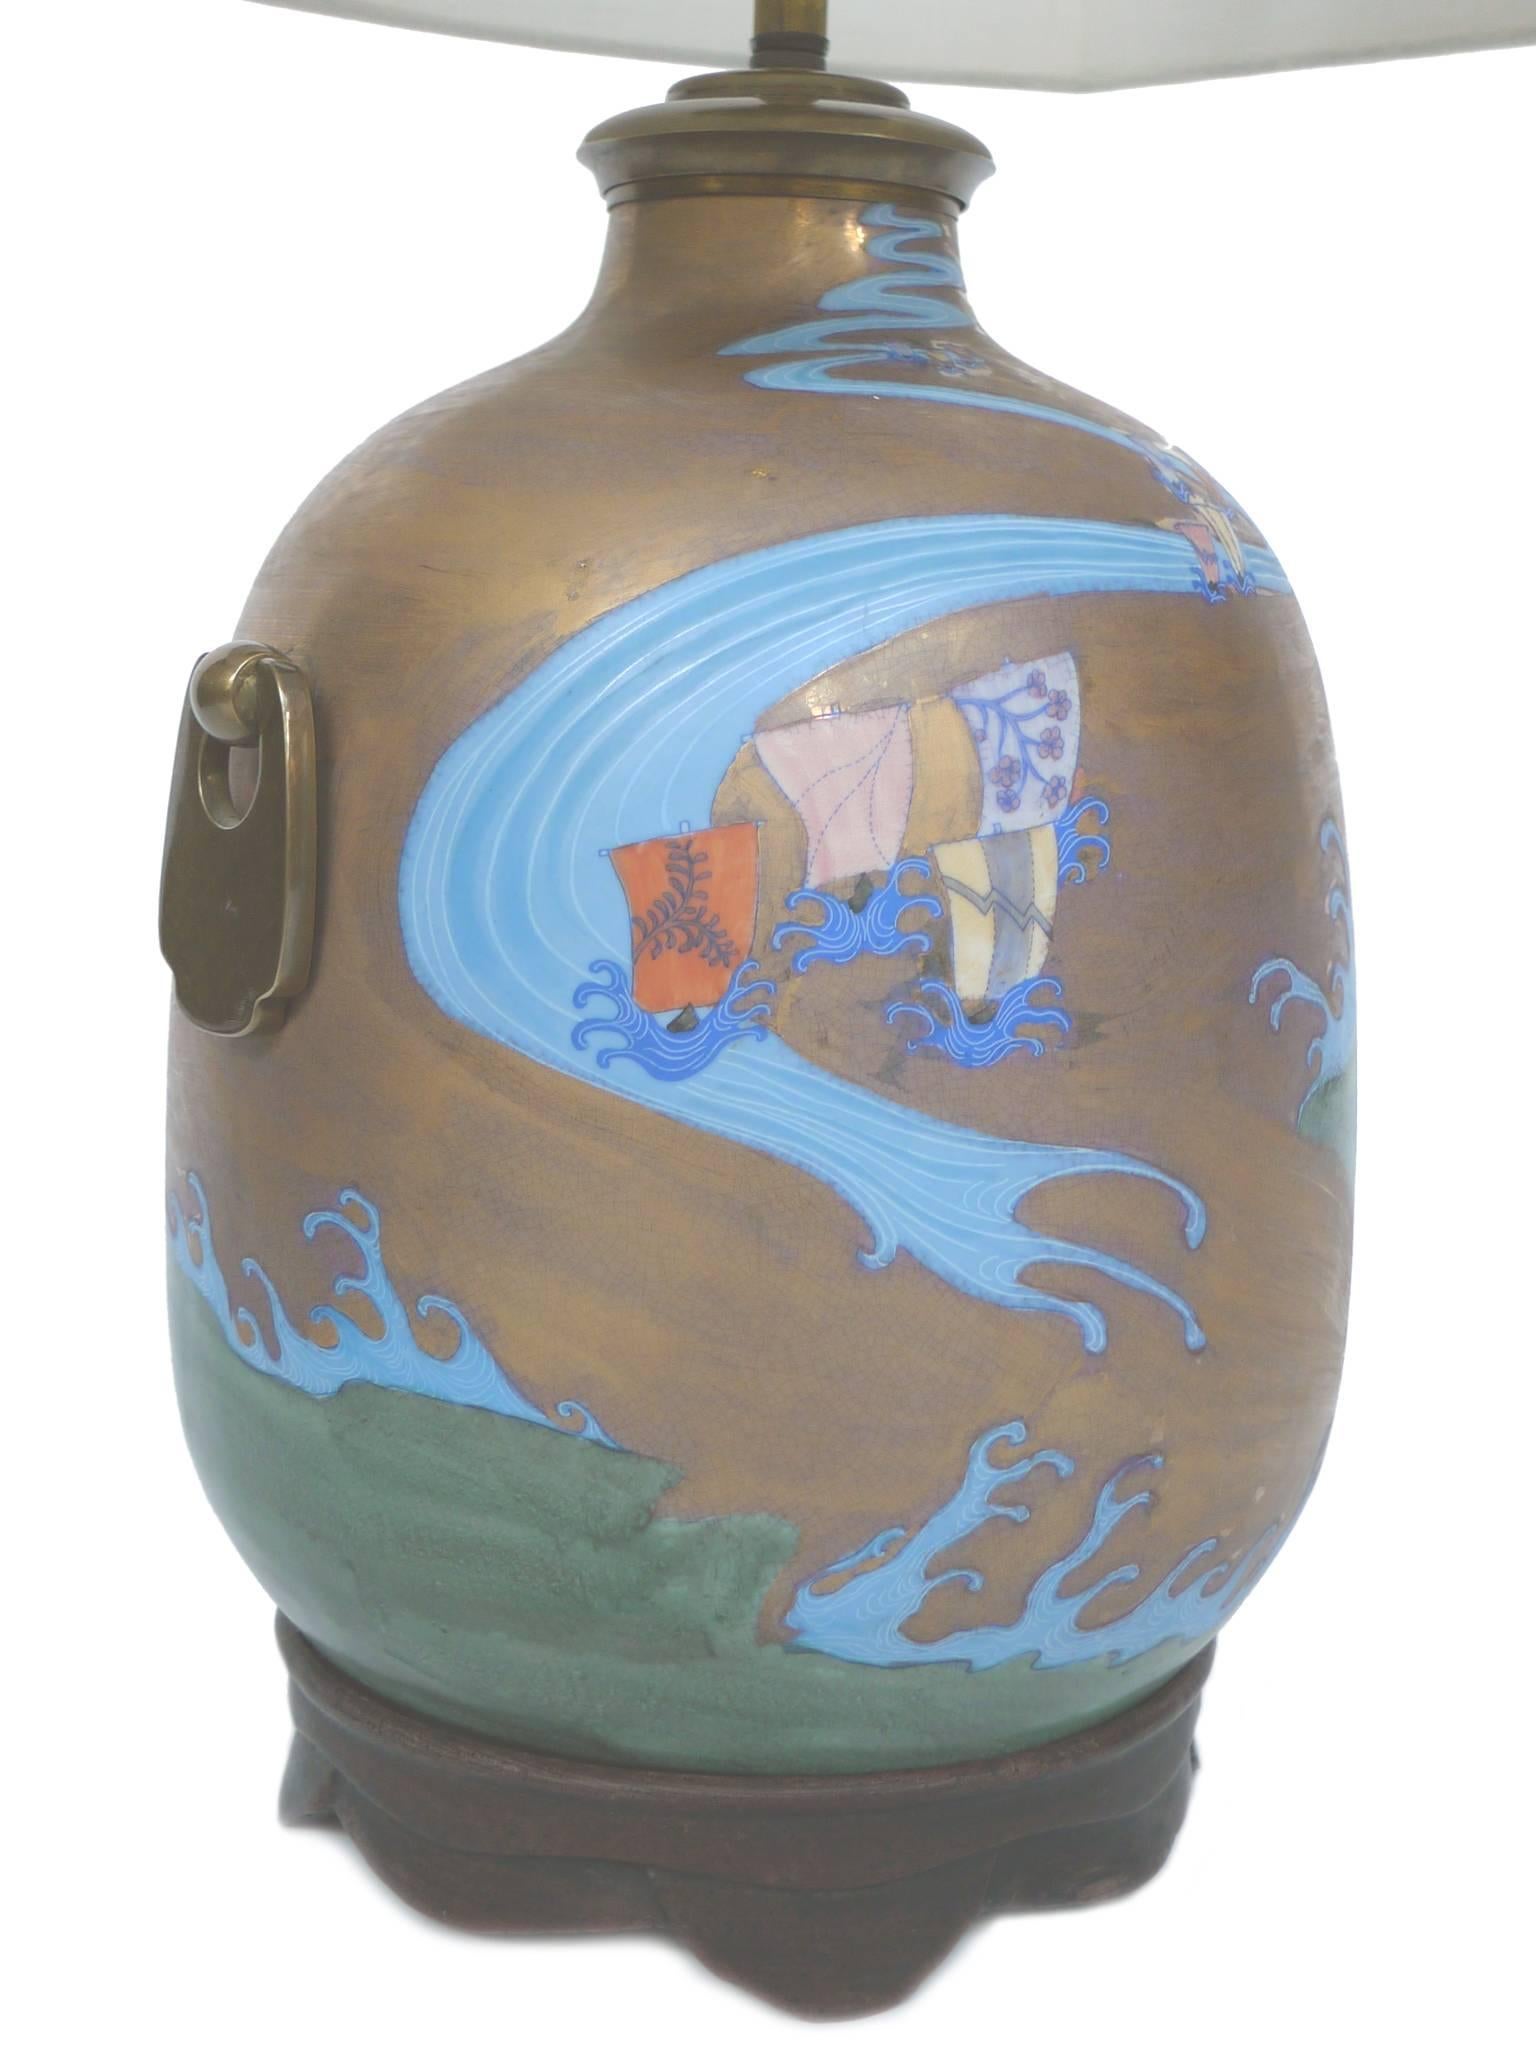 This 20th century table lamp has an oblong brass body with a wood base. The brass body is decorated with a wispy, stylized maritime scene, painted in enamel and wraps around the lamp. There's a brass handle at each side. The wood base is carved with